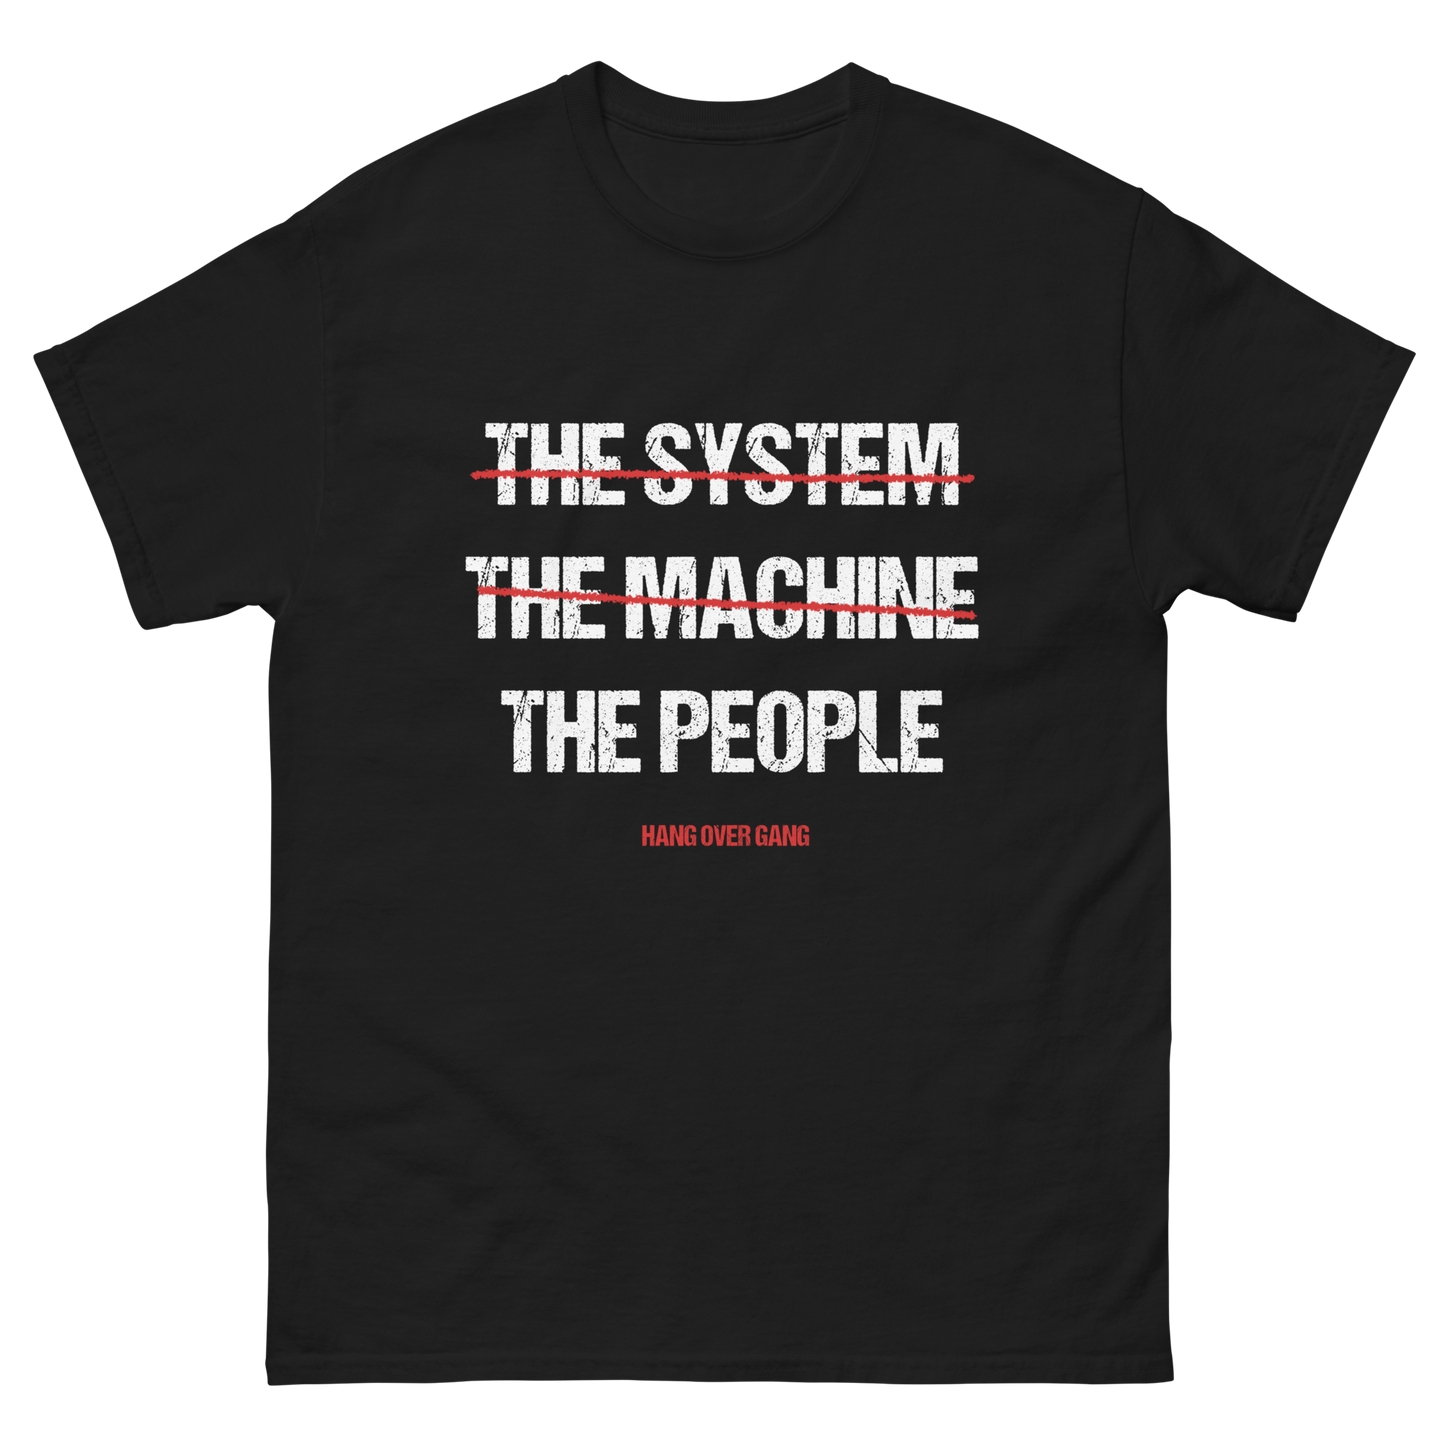 "The People" T-Shirt